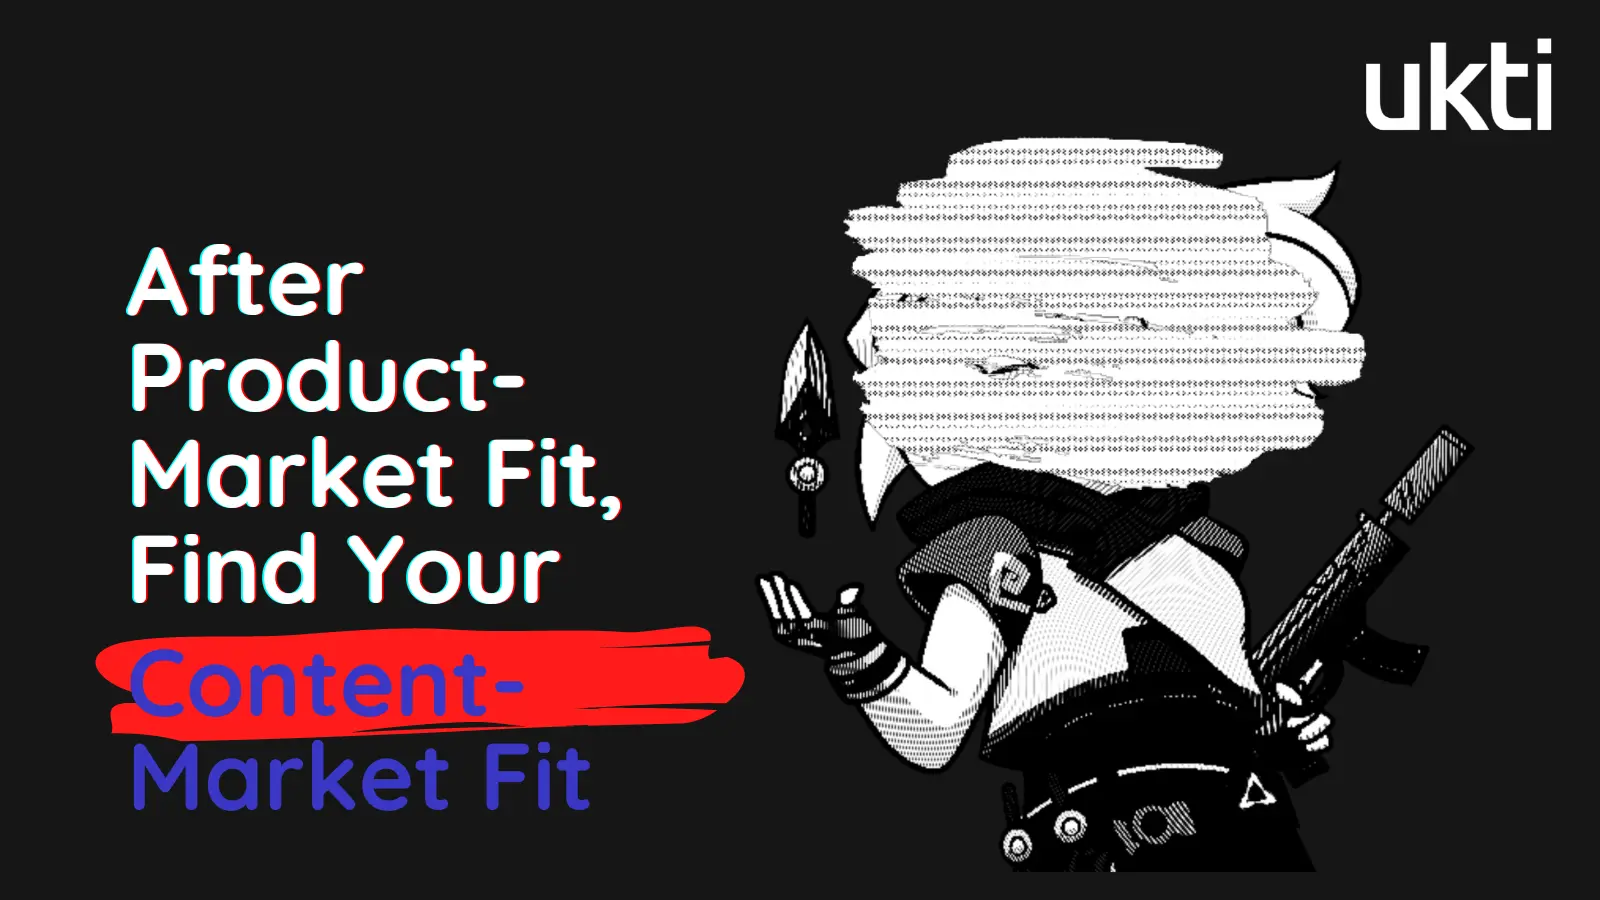 after product market fit, find your content market fit